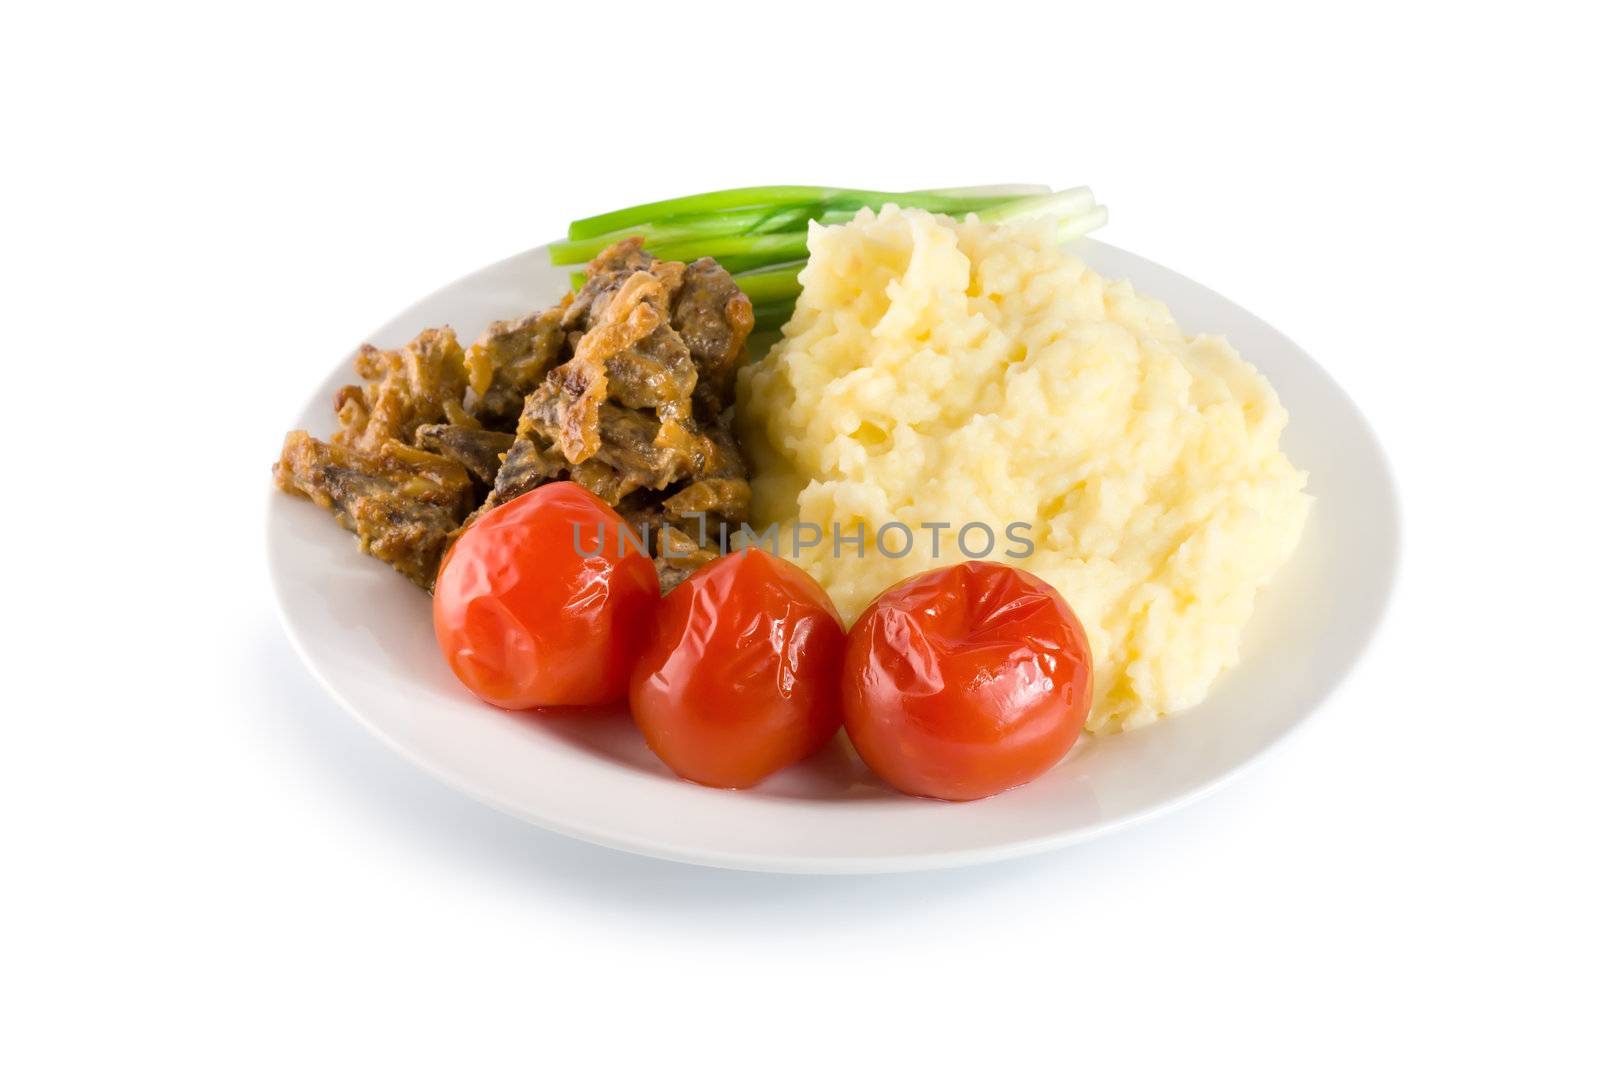 Cooked potatoes with liver and vegetables on the table (Path)